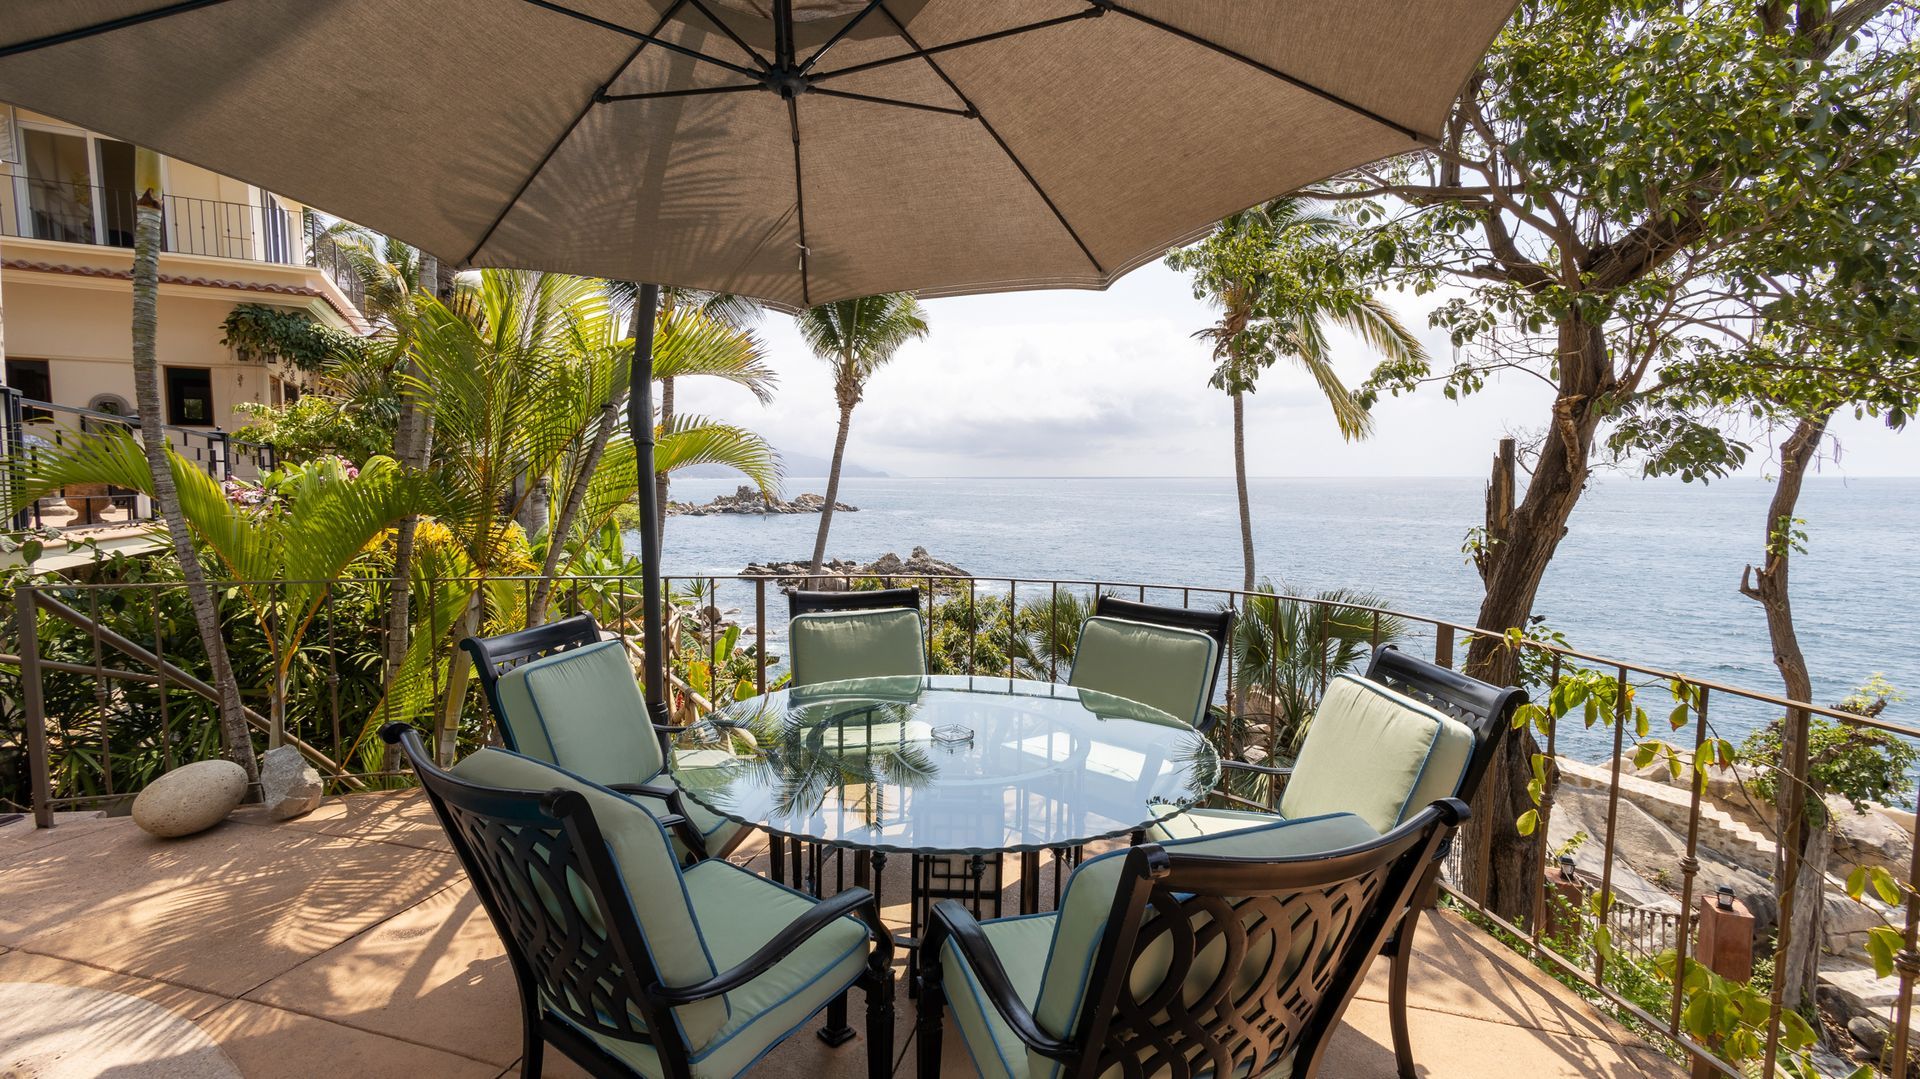 a patio with a table and chairs under an umbrella overlooking the ocean